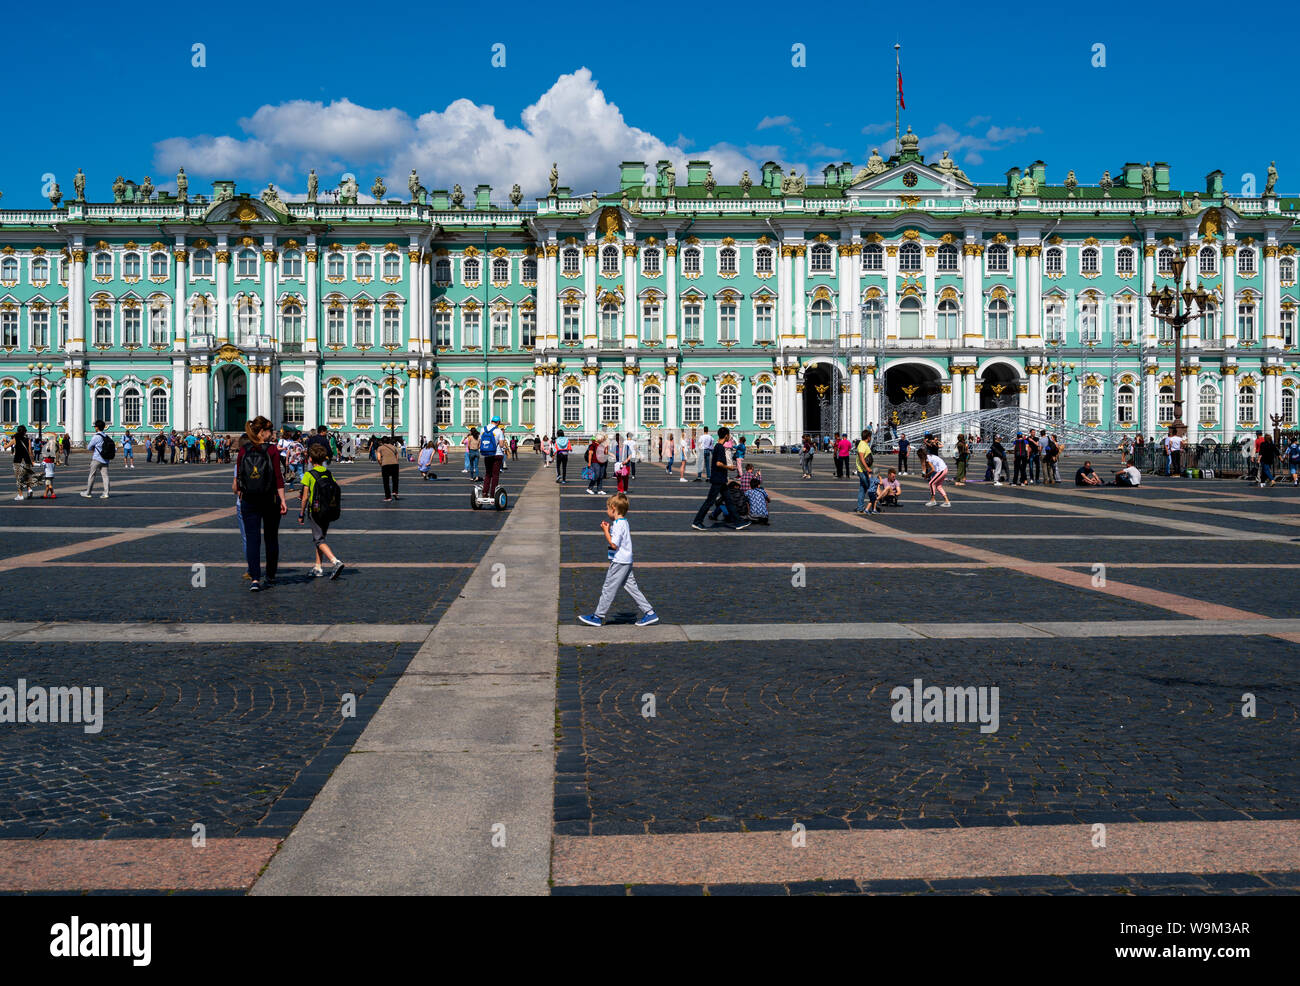 St. Petersburg, Russia -- July 21, 2019. Photo of people walking around in the square outside the Winter Palace in St Petersburg, Russia. Stock Photo